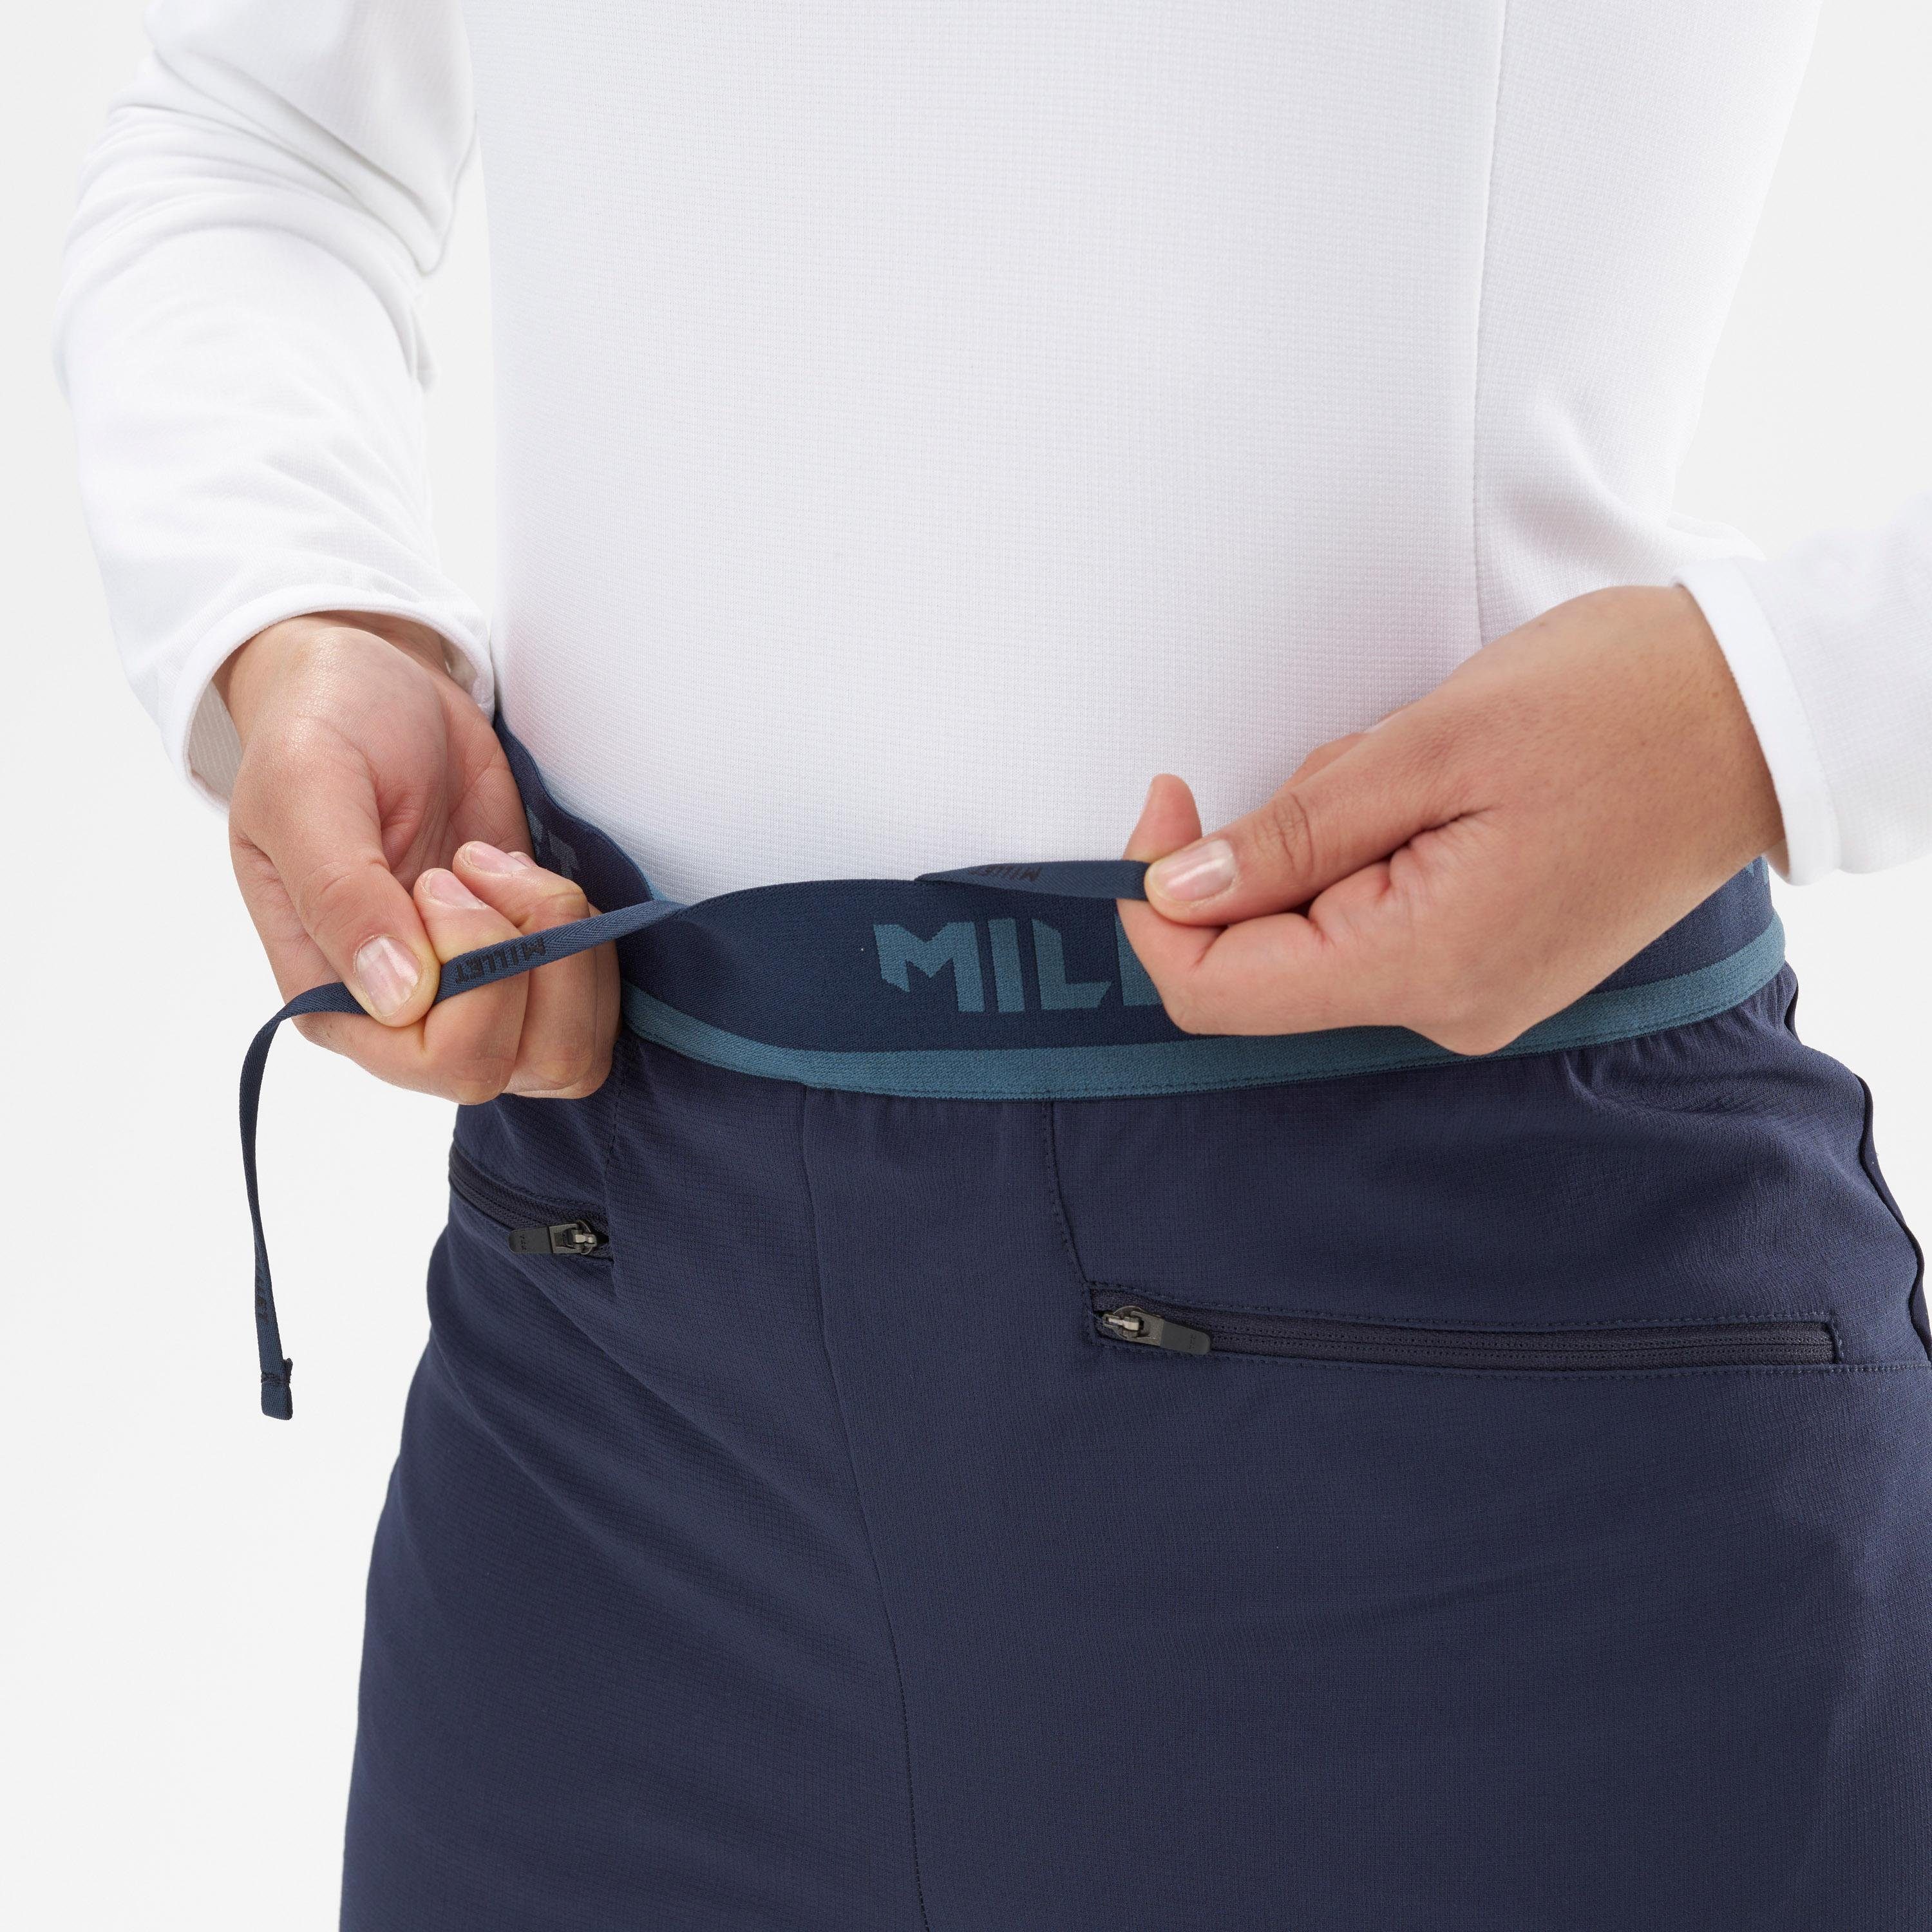 INTENSE Millet Thermohose